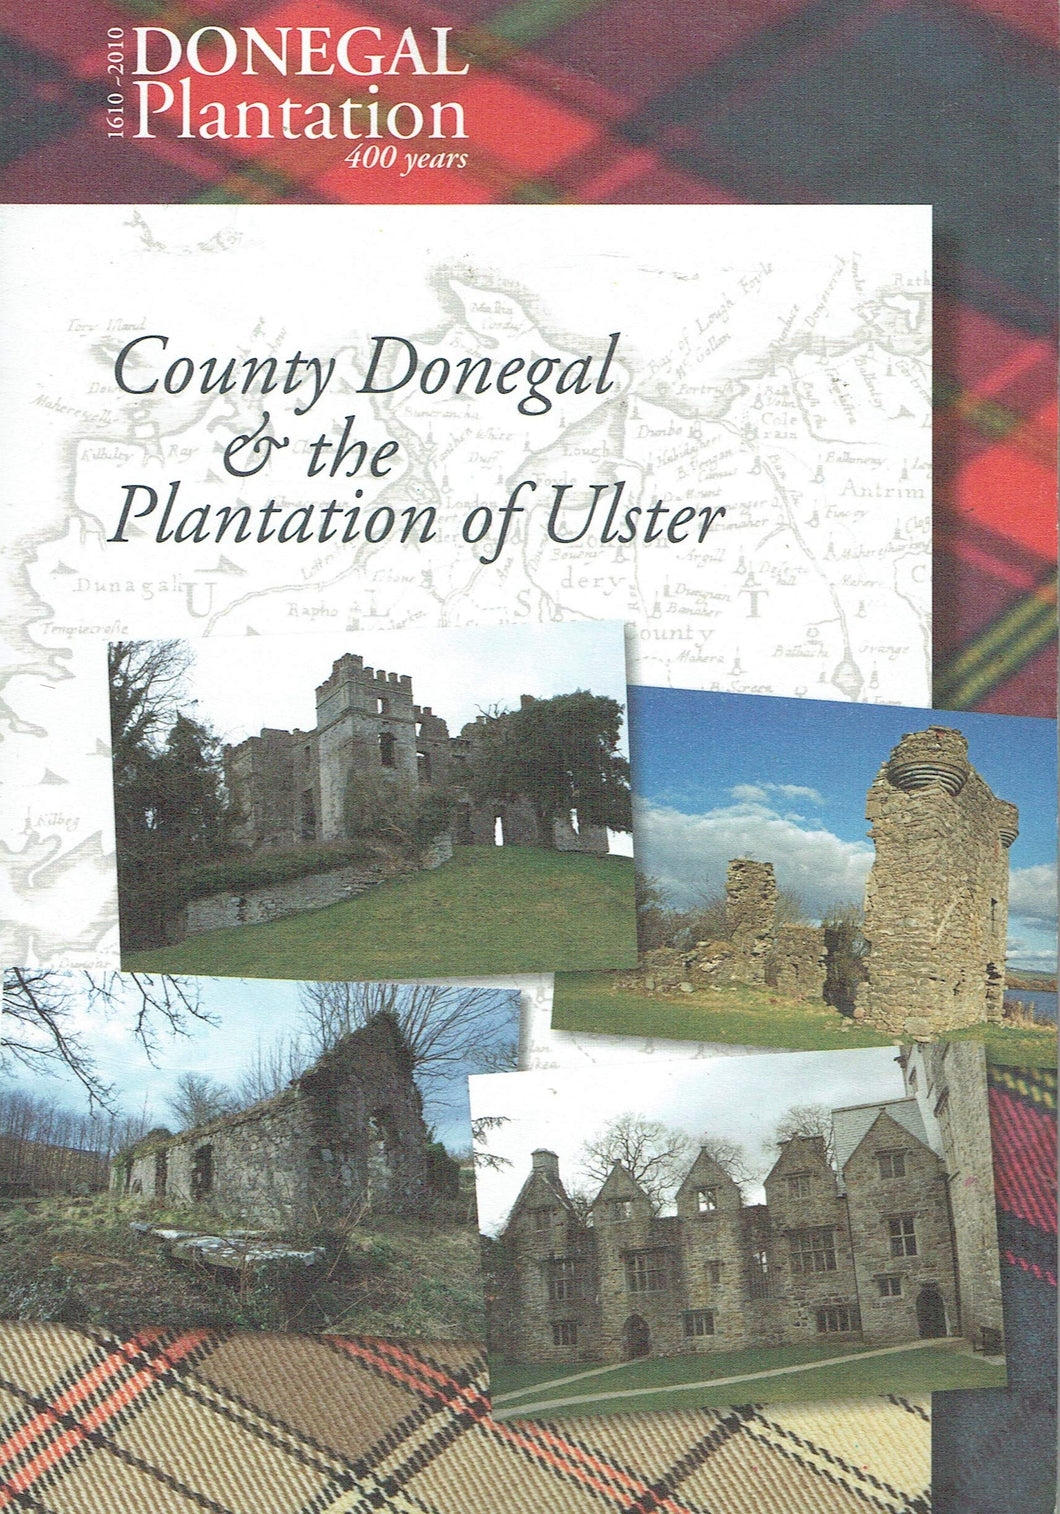 County Donegal & the Plantation of Ulster (1610 - 2010 Donegal Plantation 400 Years)